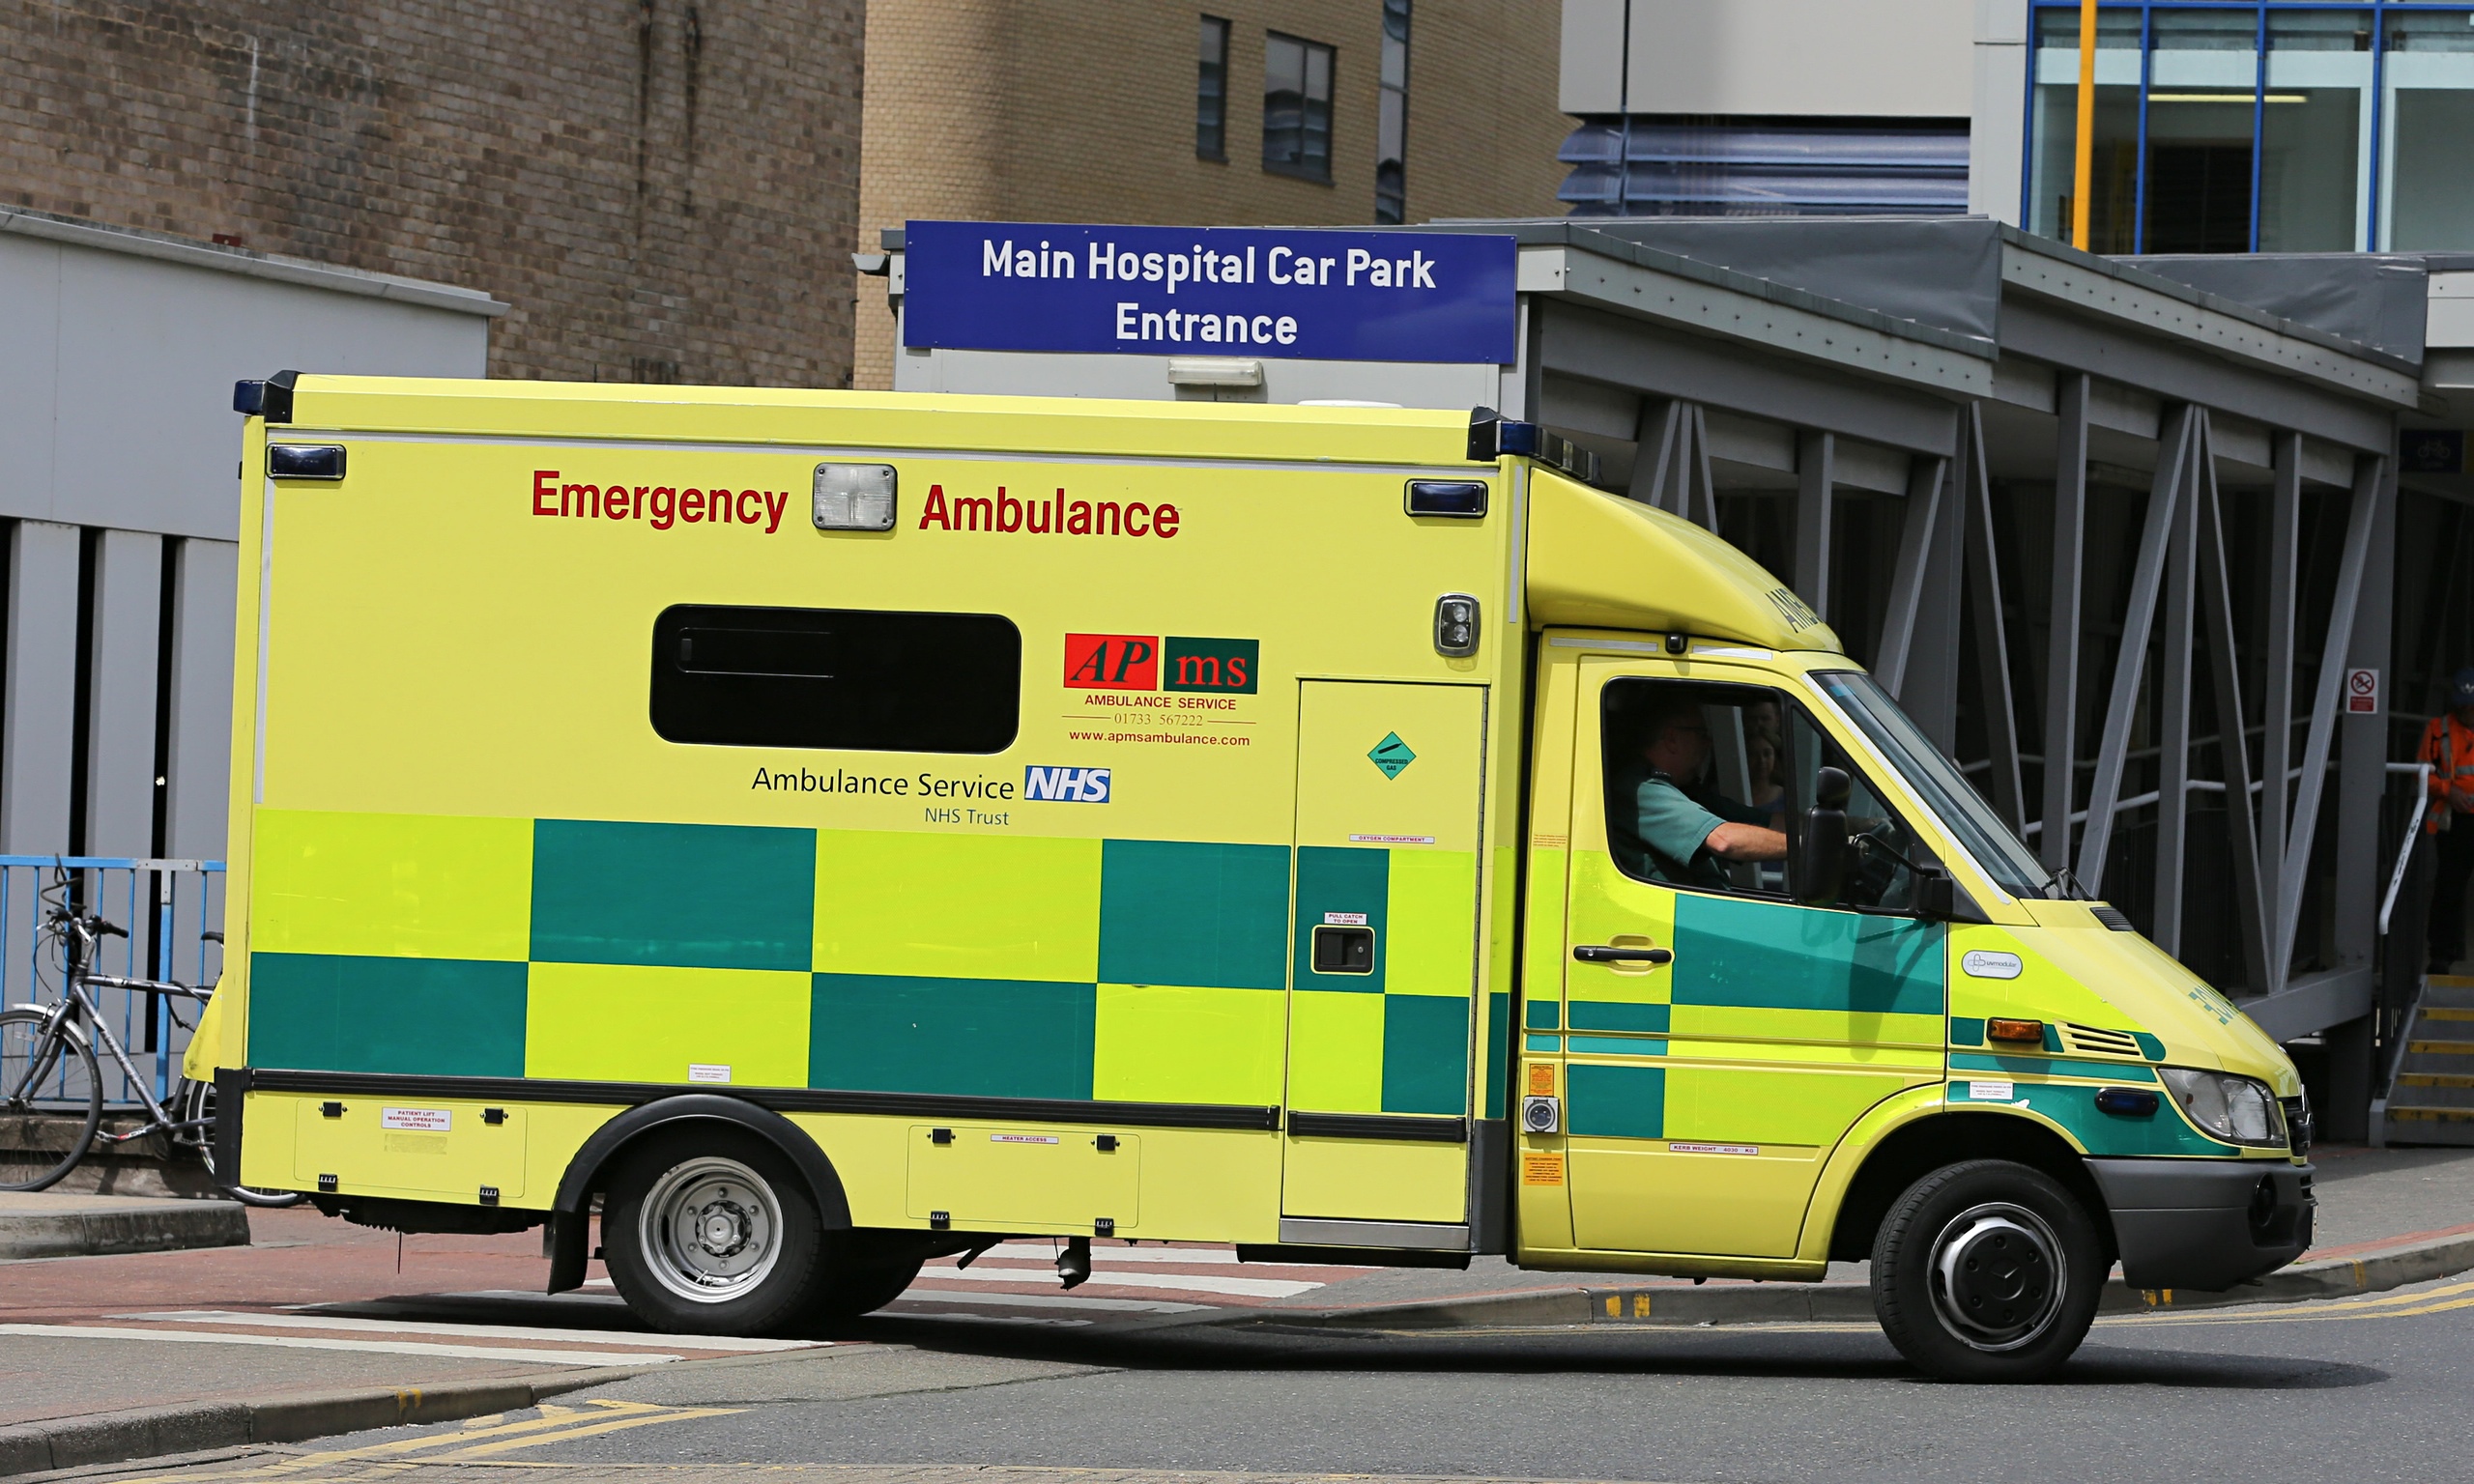 Telephone triage is helping to ease pressure on ambulance services ...